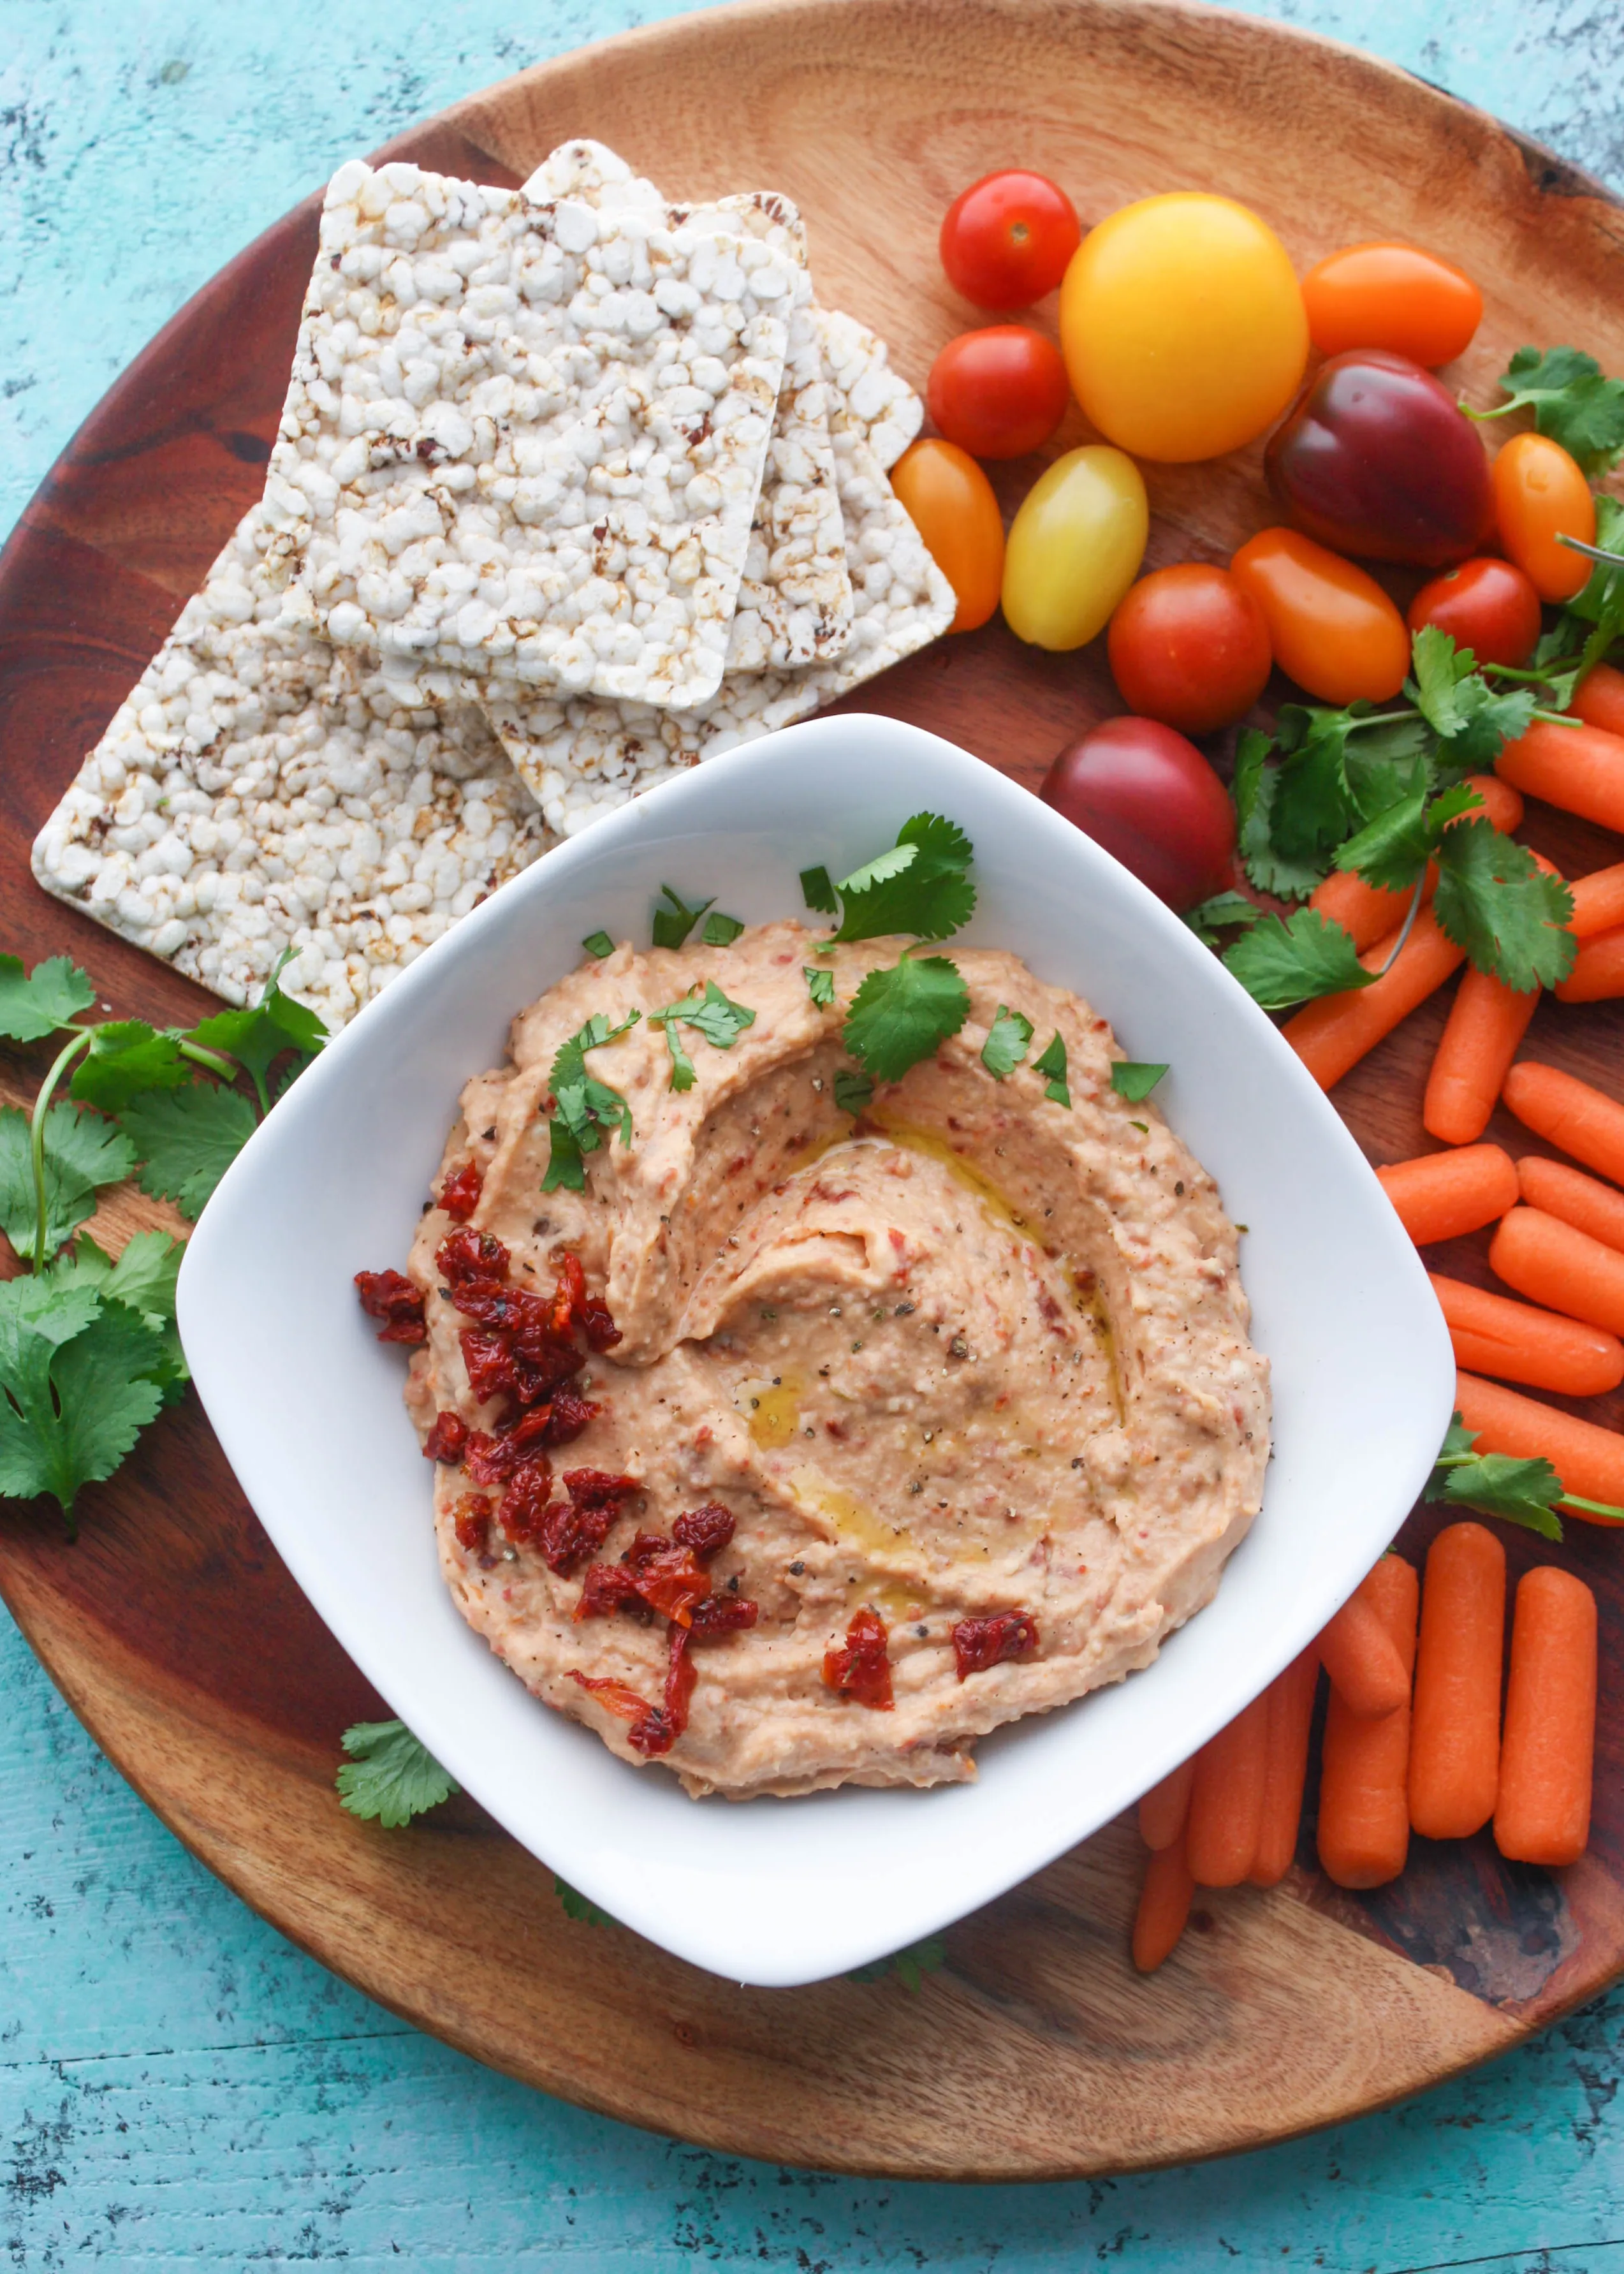 Roasted Garlic and Sun-Dried Tomato Hummus and FAGE Total Split Cups make wonderful snack options. Roasted Garlic and Sun-Dried Tomato Hummus and FAGE Total Split Cups are perfect for snack time! 